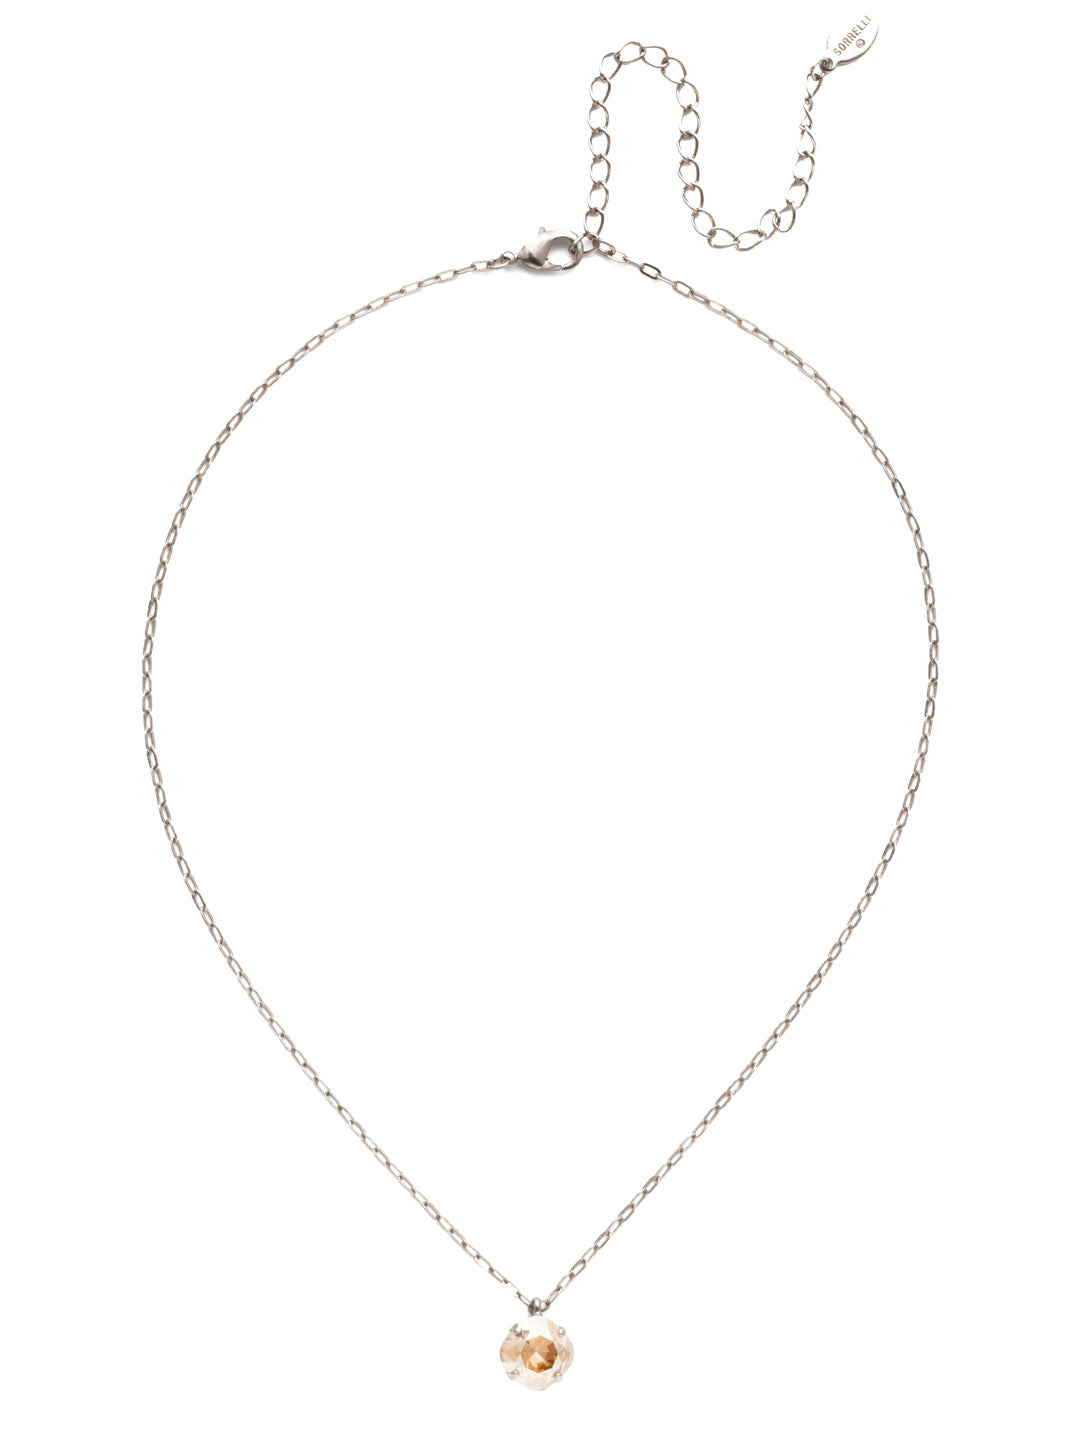 Siren Pendant Necklace - NEP22ASDCH - <p>With a cushion-cut crystal and delicate chain, the Siren Pendant  will add a litle sparkle to your everyday look. From Sorrelli's Dark Champagne collection in our Antique Silver-tone finish.</p>